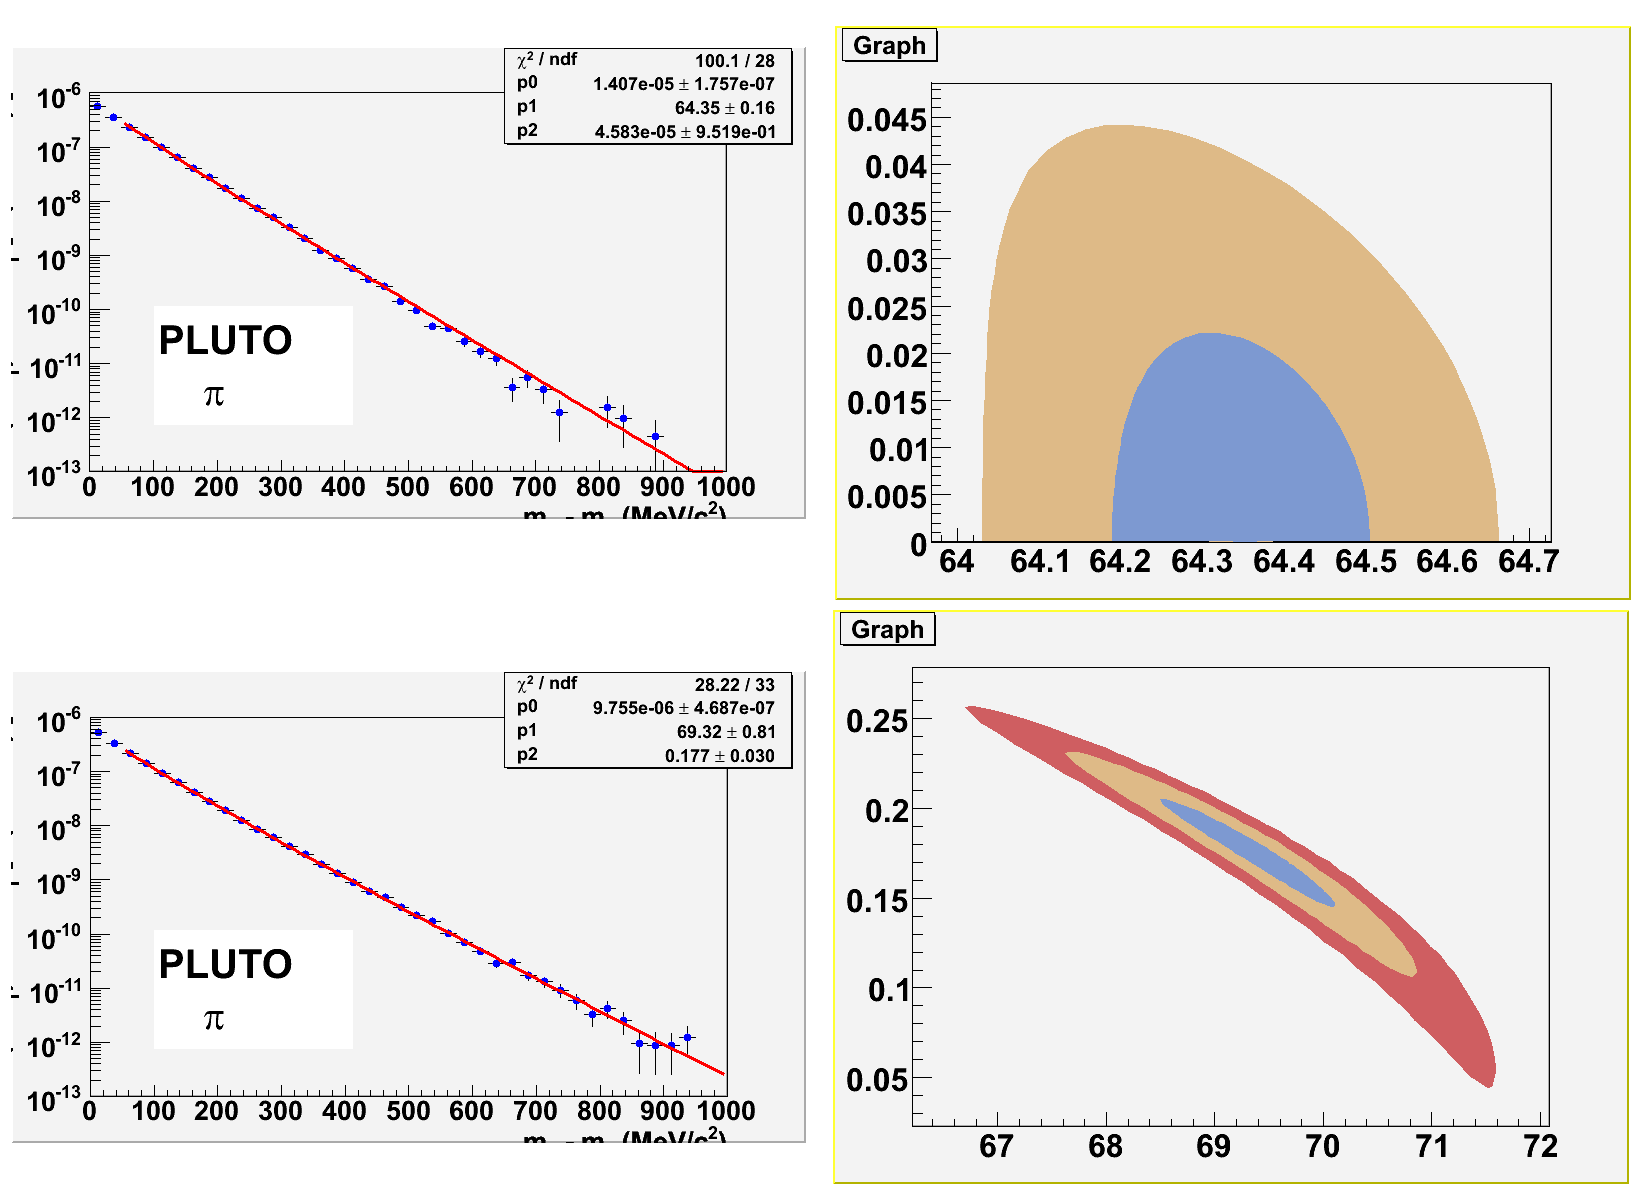 PLUTO up: T=58MeV, b=0 down: T=58, b=0.3 left: fitted distribution right: chi2contour plot b vs T (1, 2, 3 sigma)